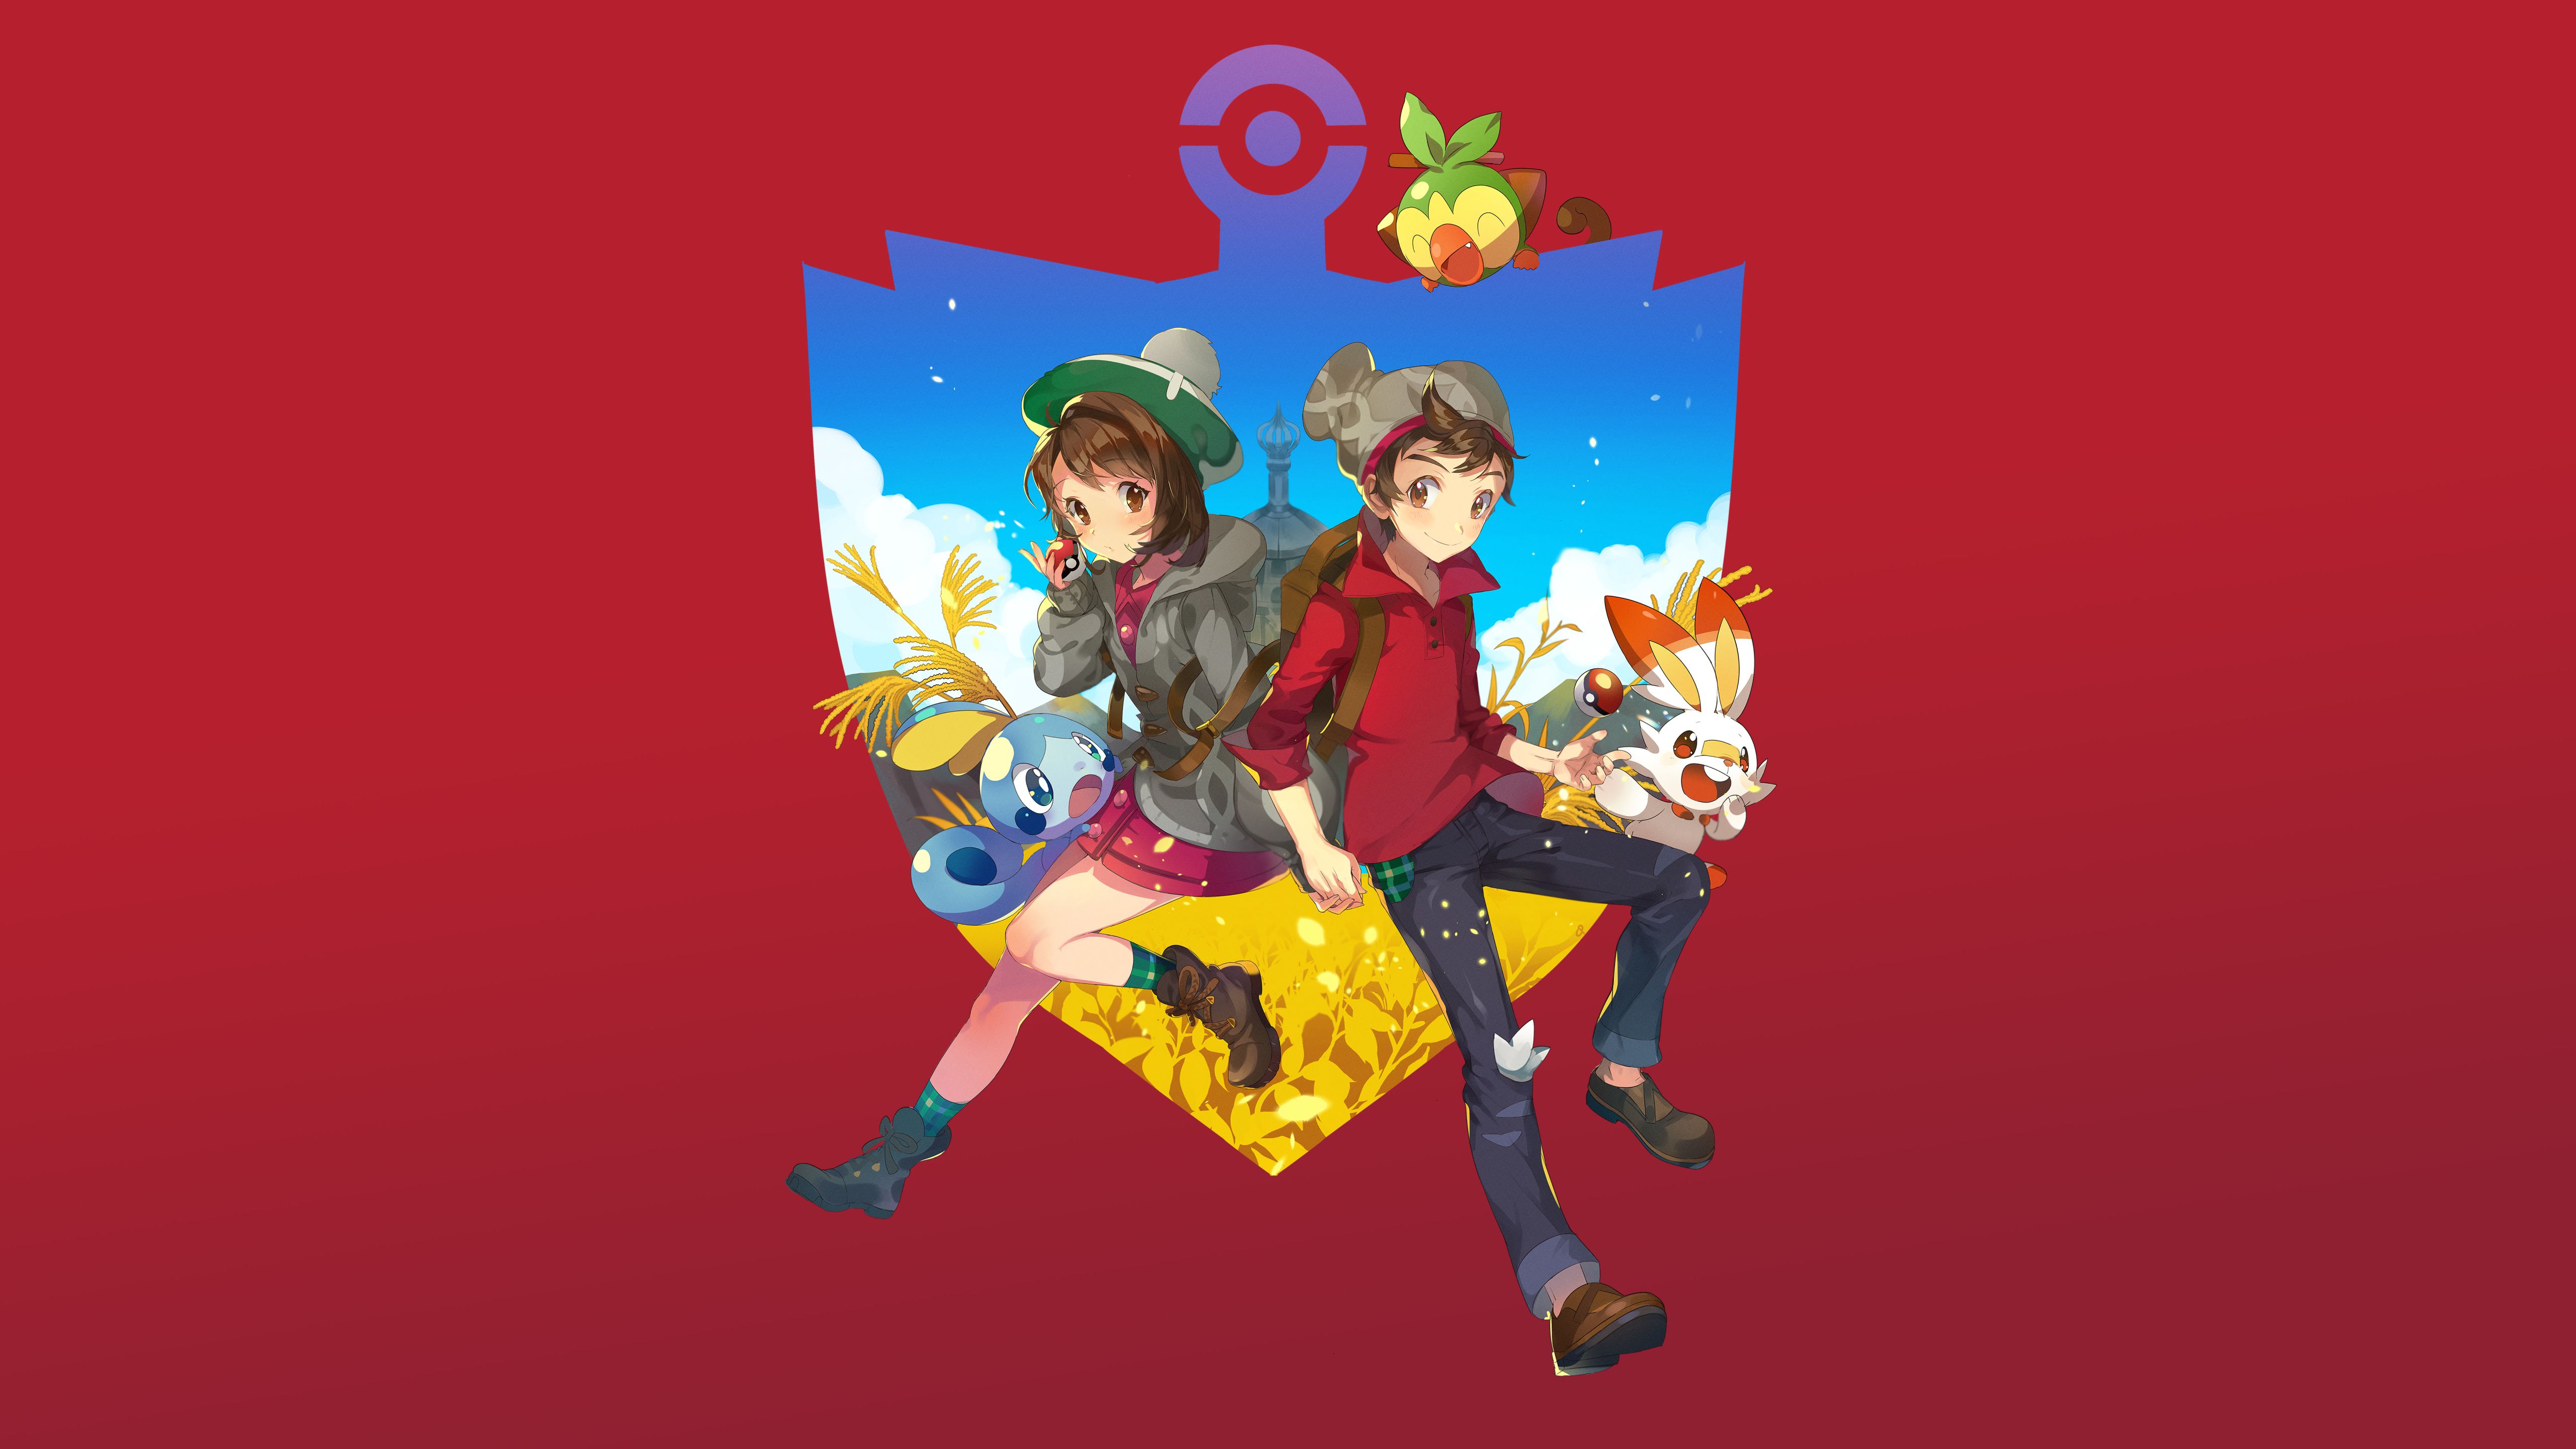 Pokémon Sword And Shield Computer Wallpapers - Wallpaper Cave